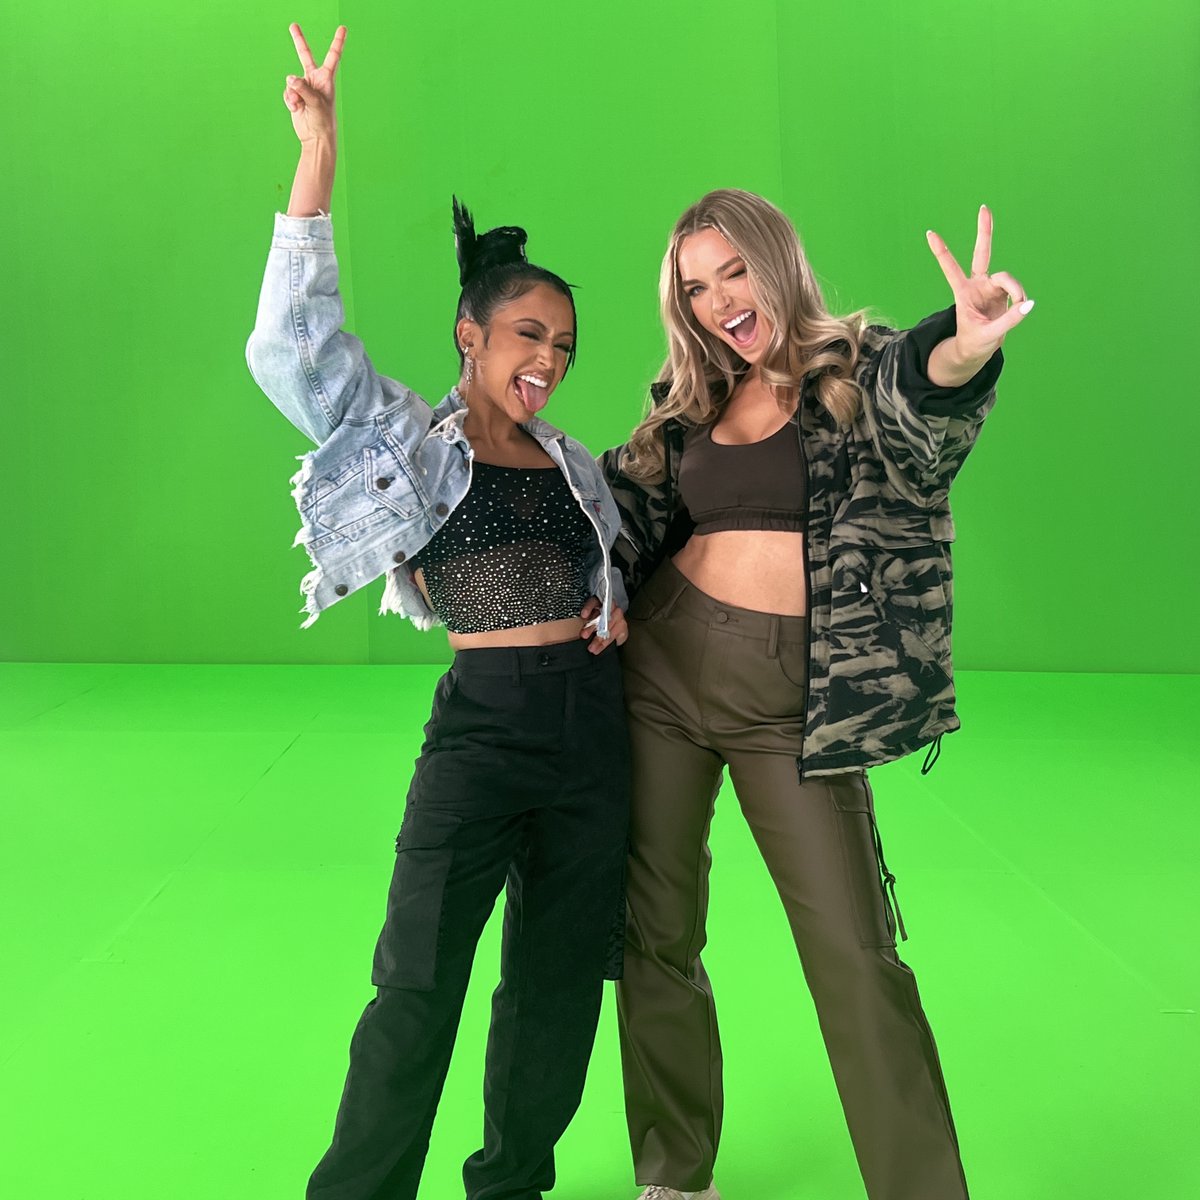 .@lizakoshy and @camillekostek have us READY for #DancingWithMyself. 😍 The party continues TONIGHT 10/9c on NBC, streaming next day on @PeacockTV.